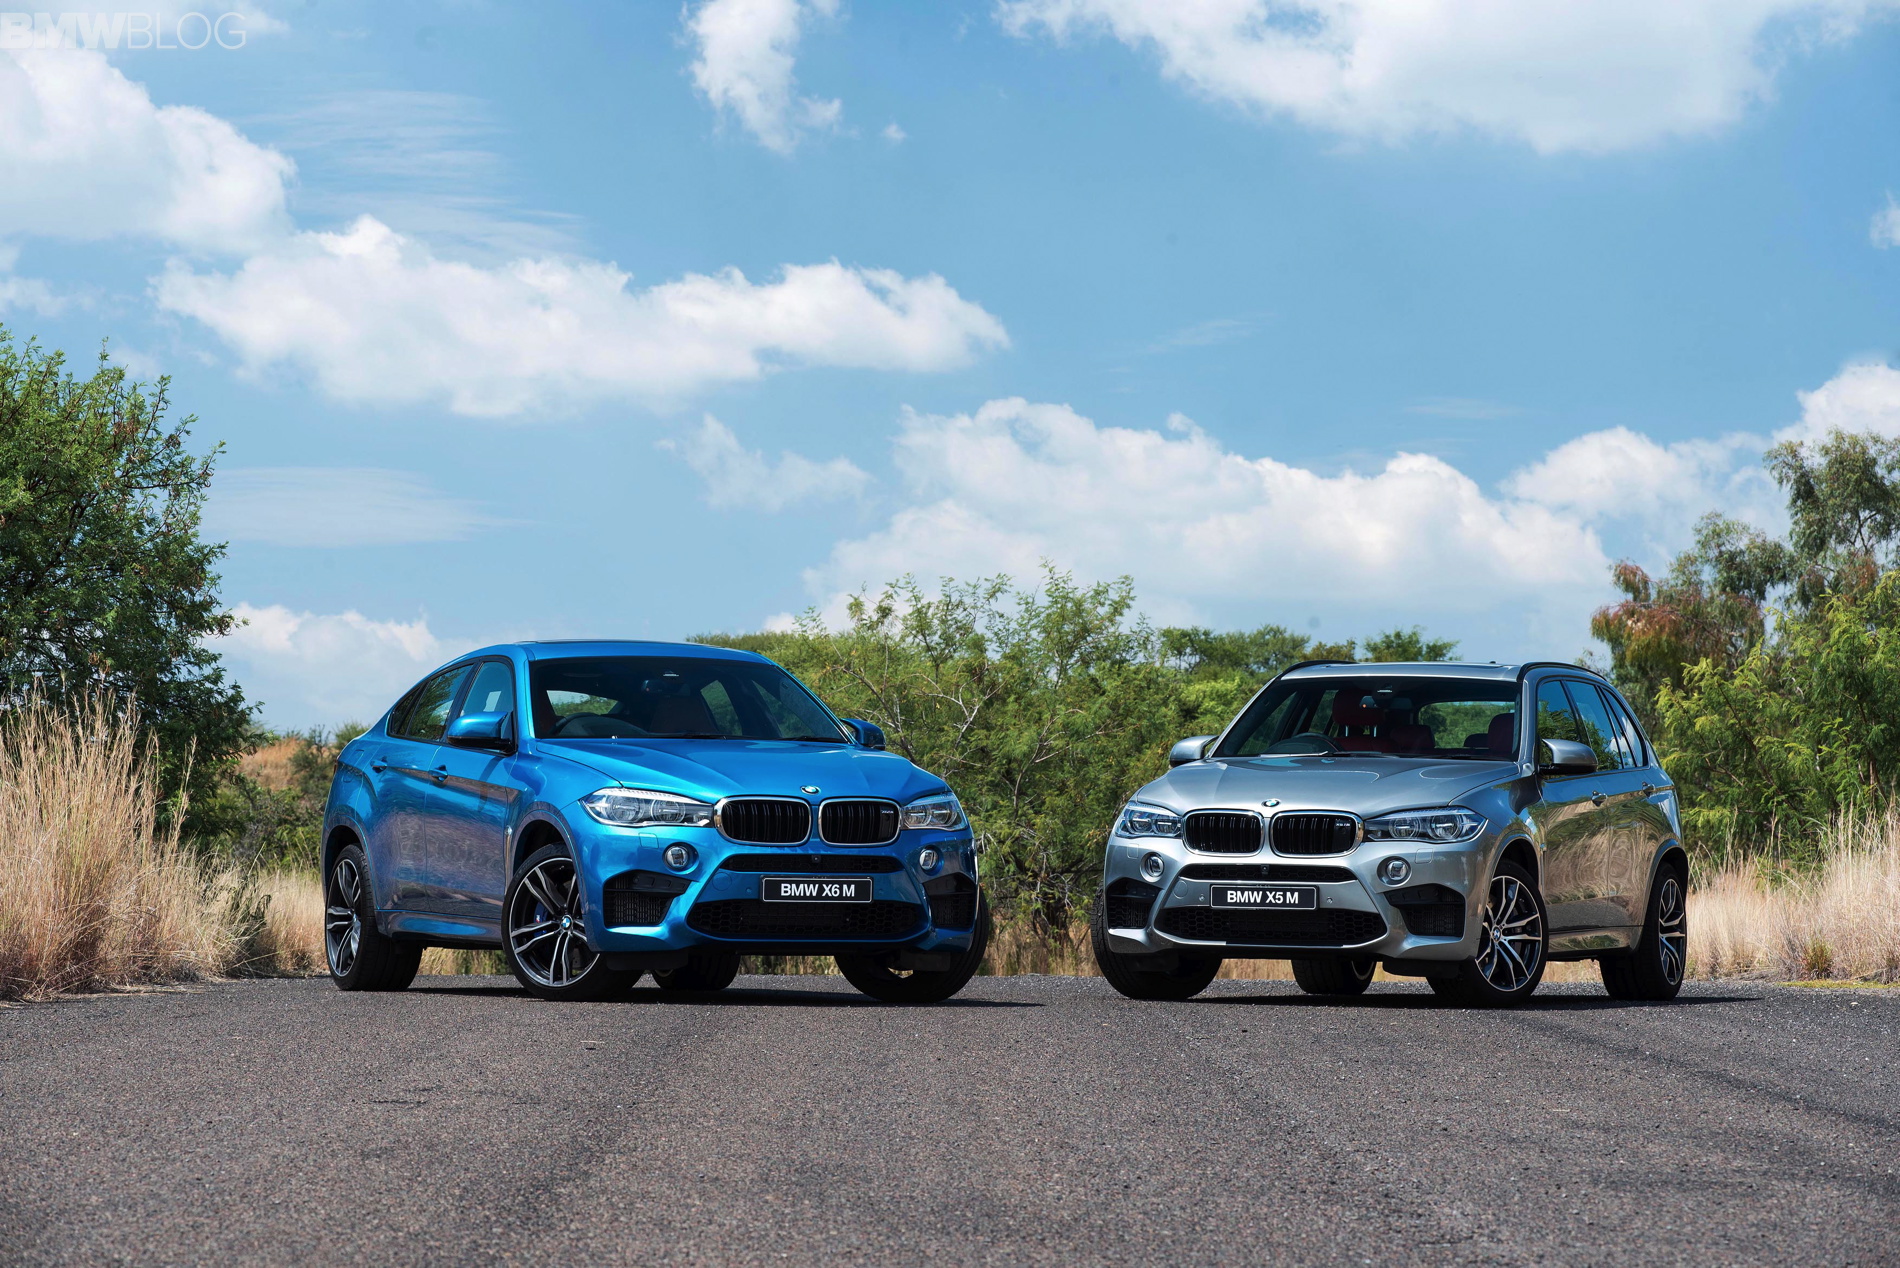 The 2015 BMW X6 M starts at $103,050 in the U.S., including $950 Destinatio...